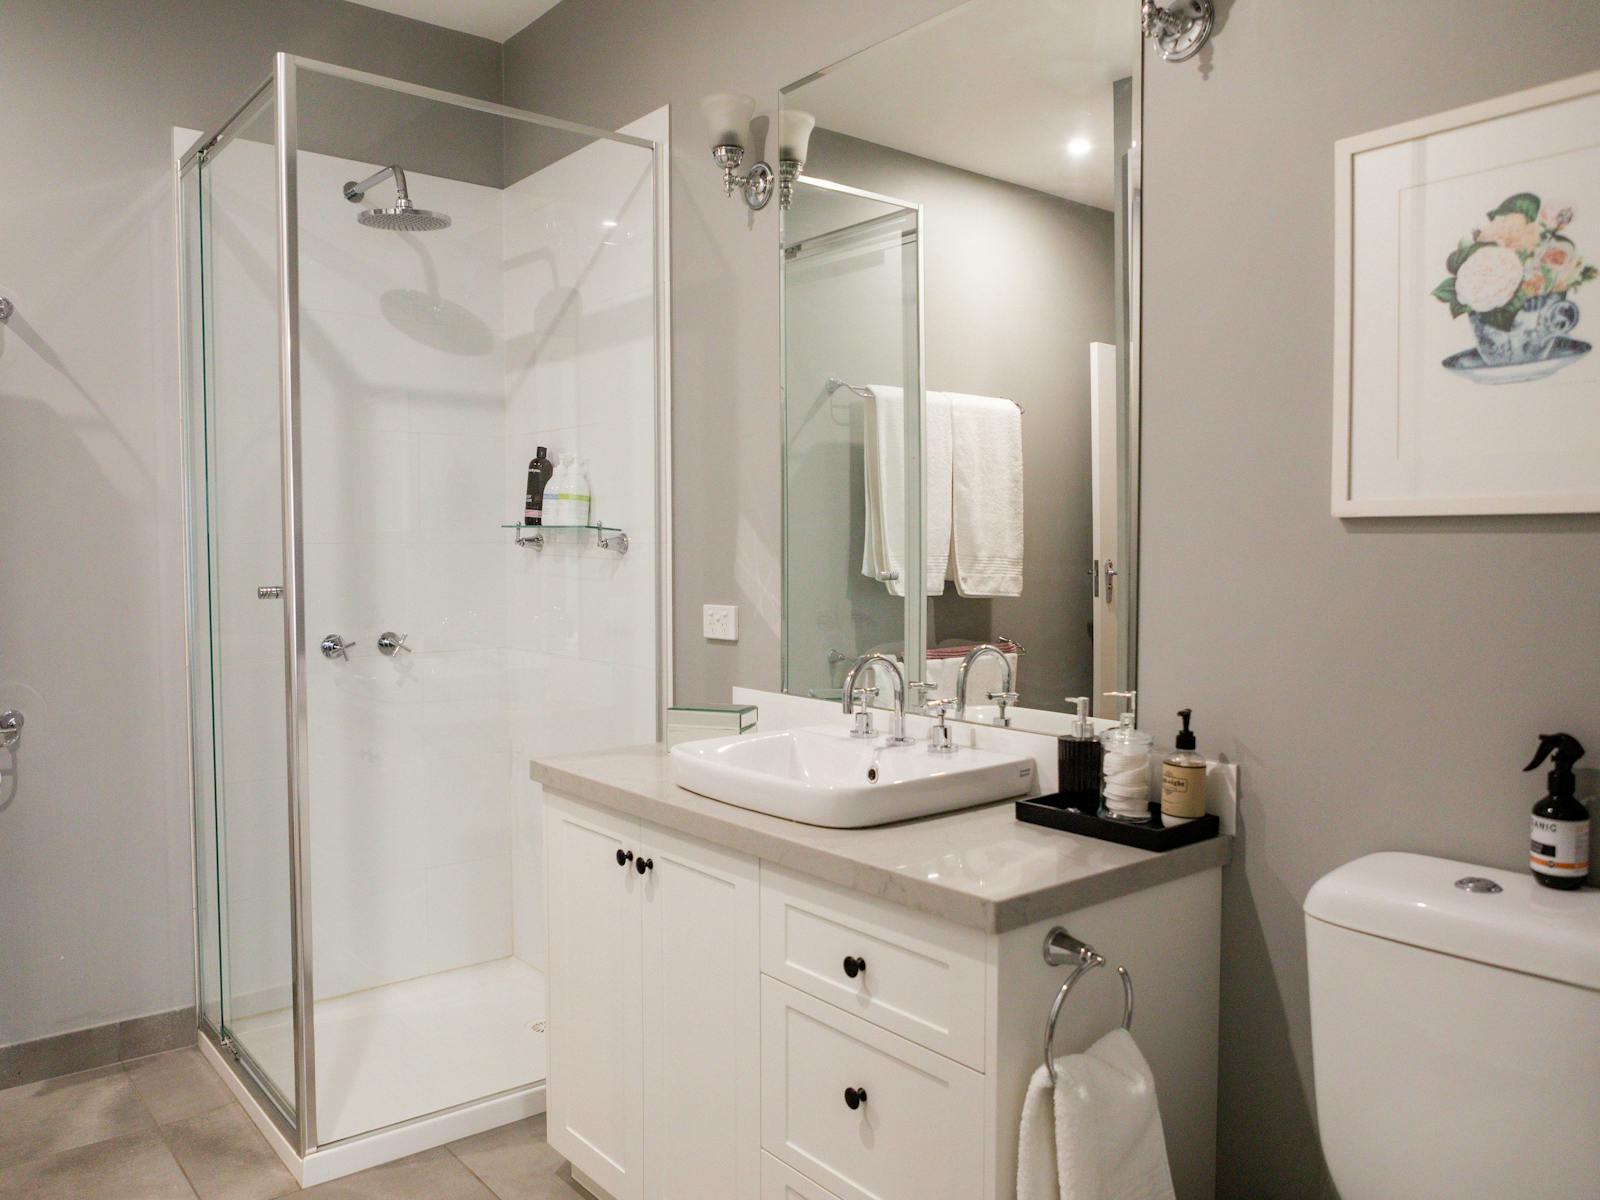 Ensuite. Room for accessibility needs. Alternative back shower has space for accessibility needs.